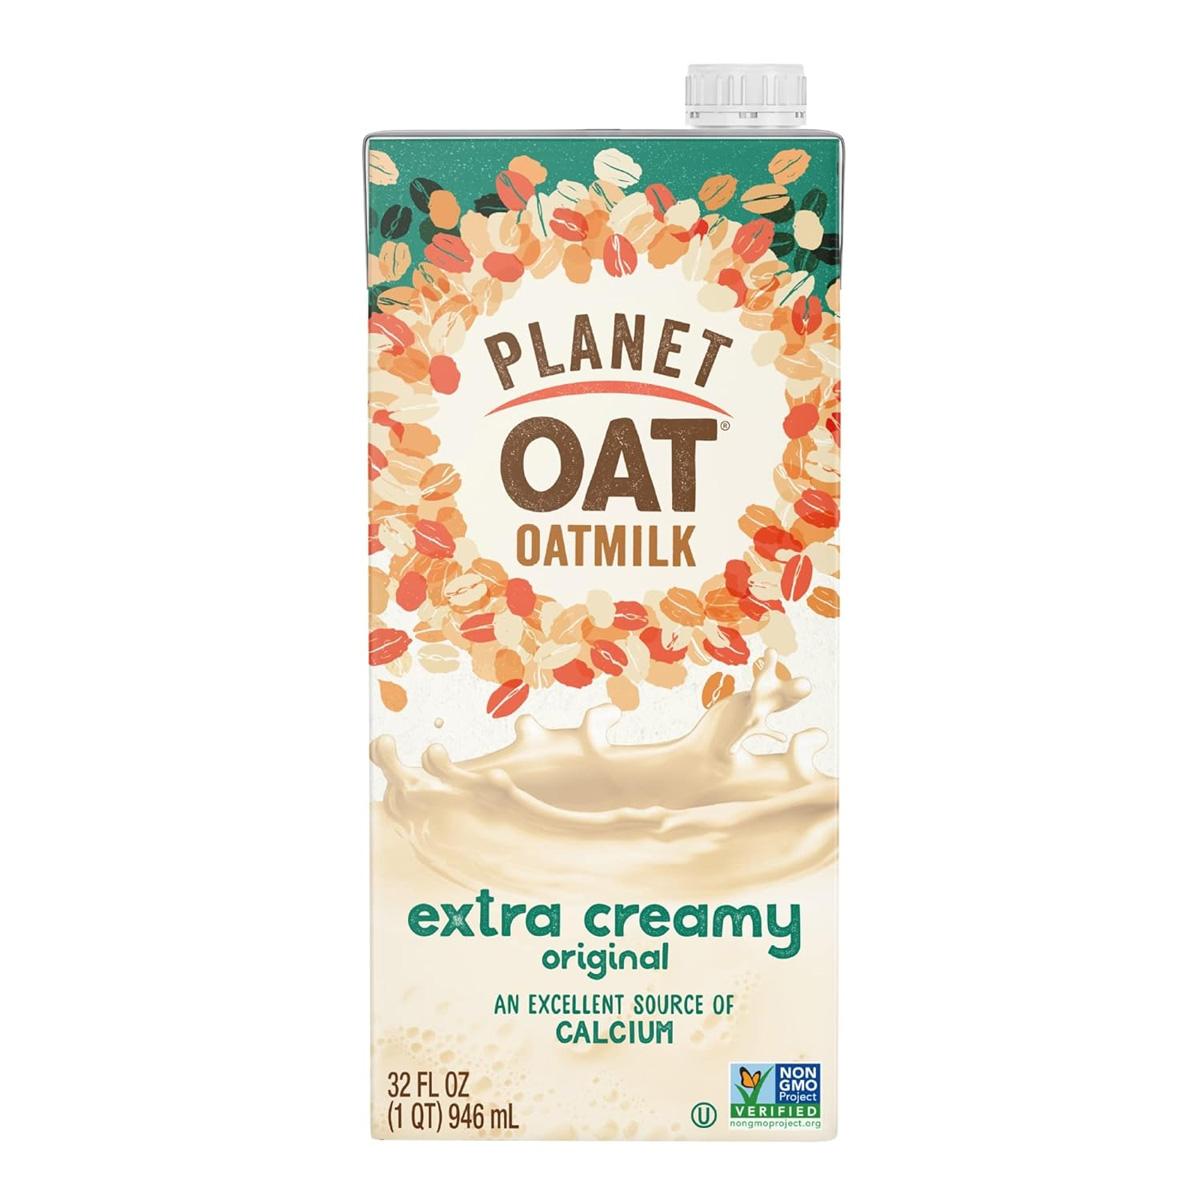 Planet Oat Original Oatmilk Extra Creamy 6 Pack for $11.94